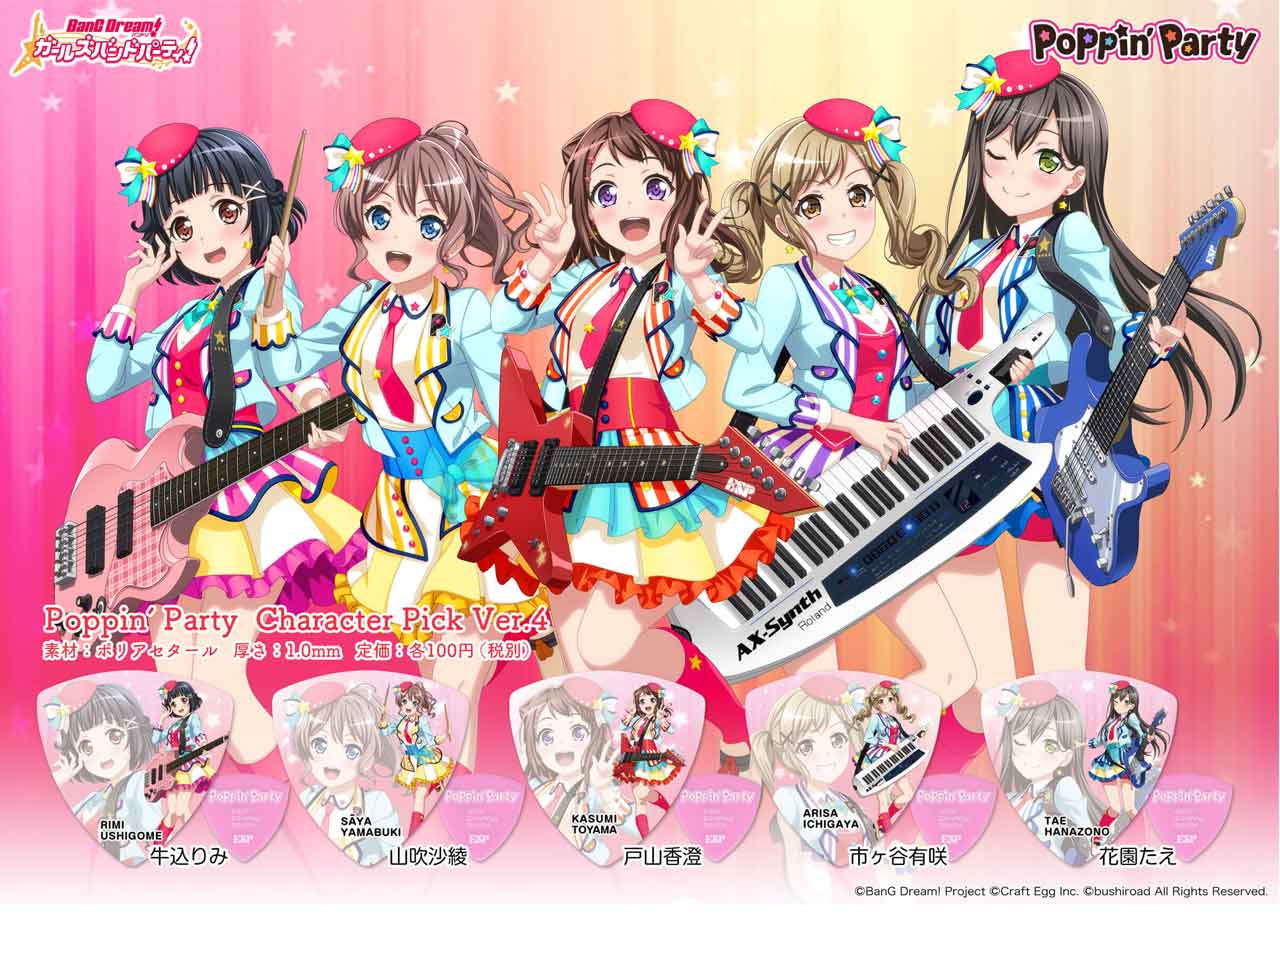 【ESP×BanG Dream!コラボピック】Poppin’Party Character Pick Ver.4 "花園たえ"（GBP Tae Poppin Party 4）＆”ハメパチ” セット